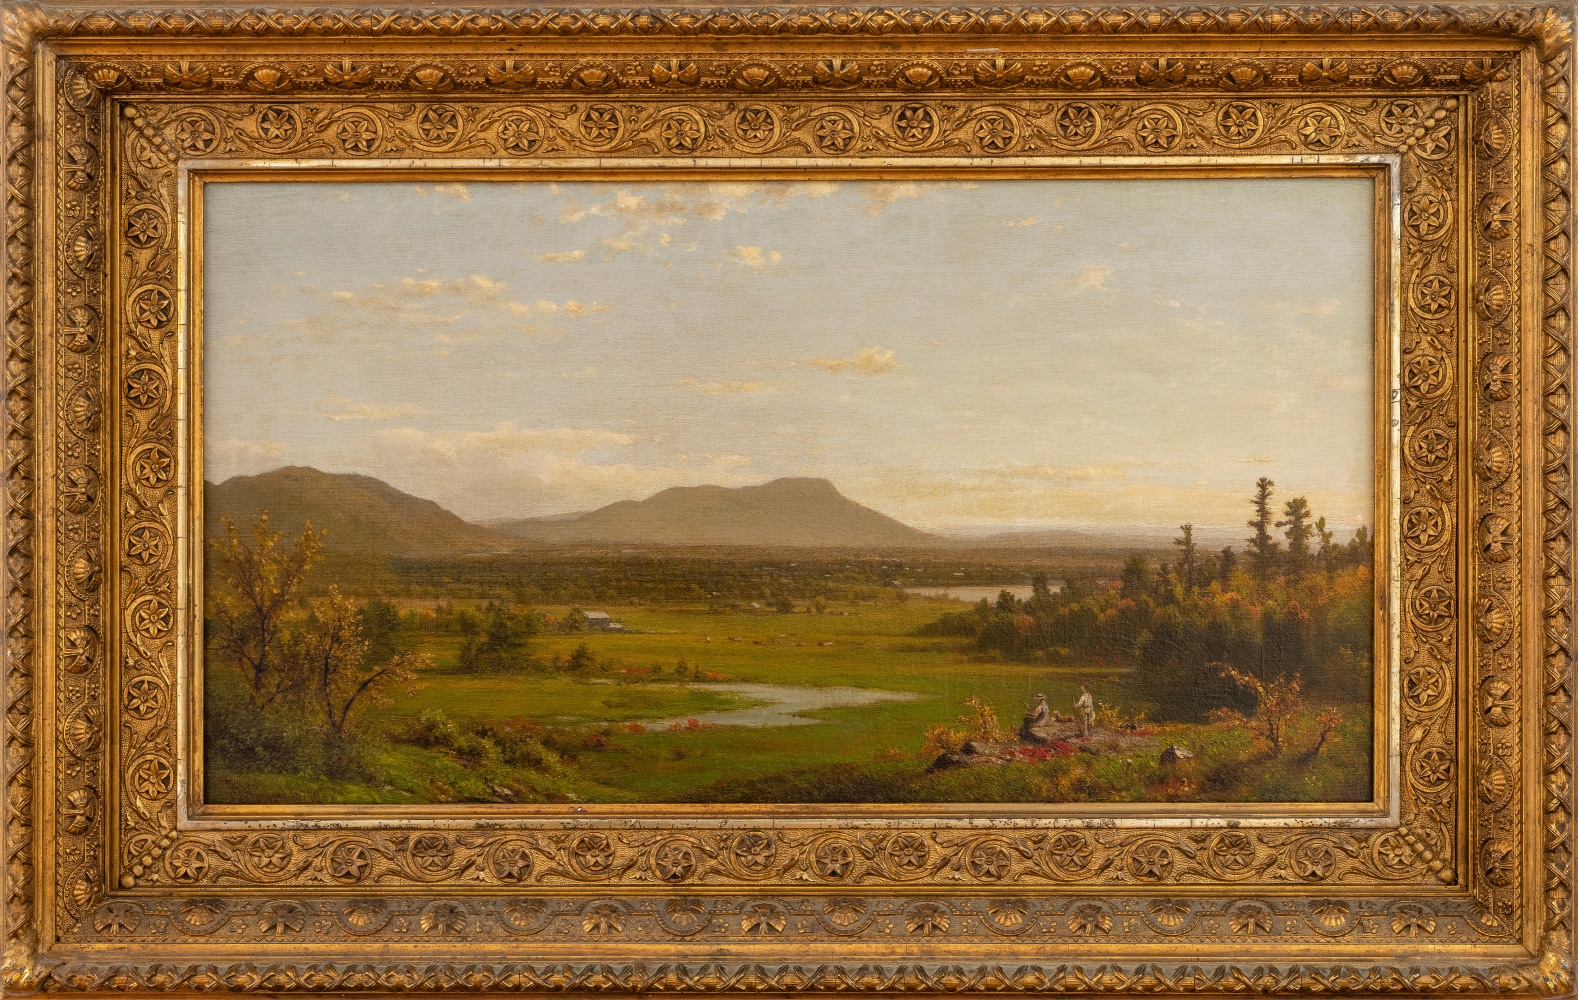 Richard William Hubbard (1816–1888), Landscape, 1870, oil on canvas, 13 1/2 x 24 in., signed and dated lower left: R. W. Hubbard 1870 (framed)